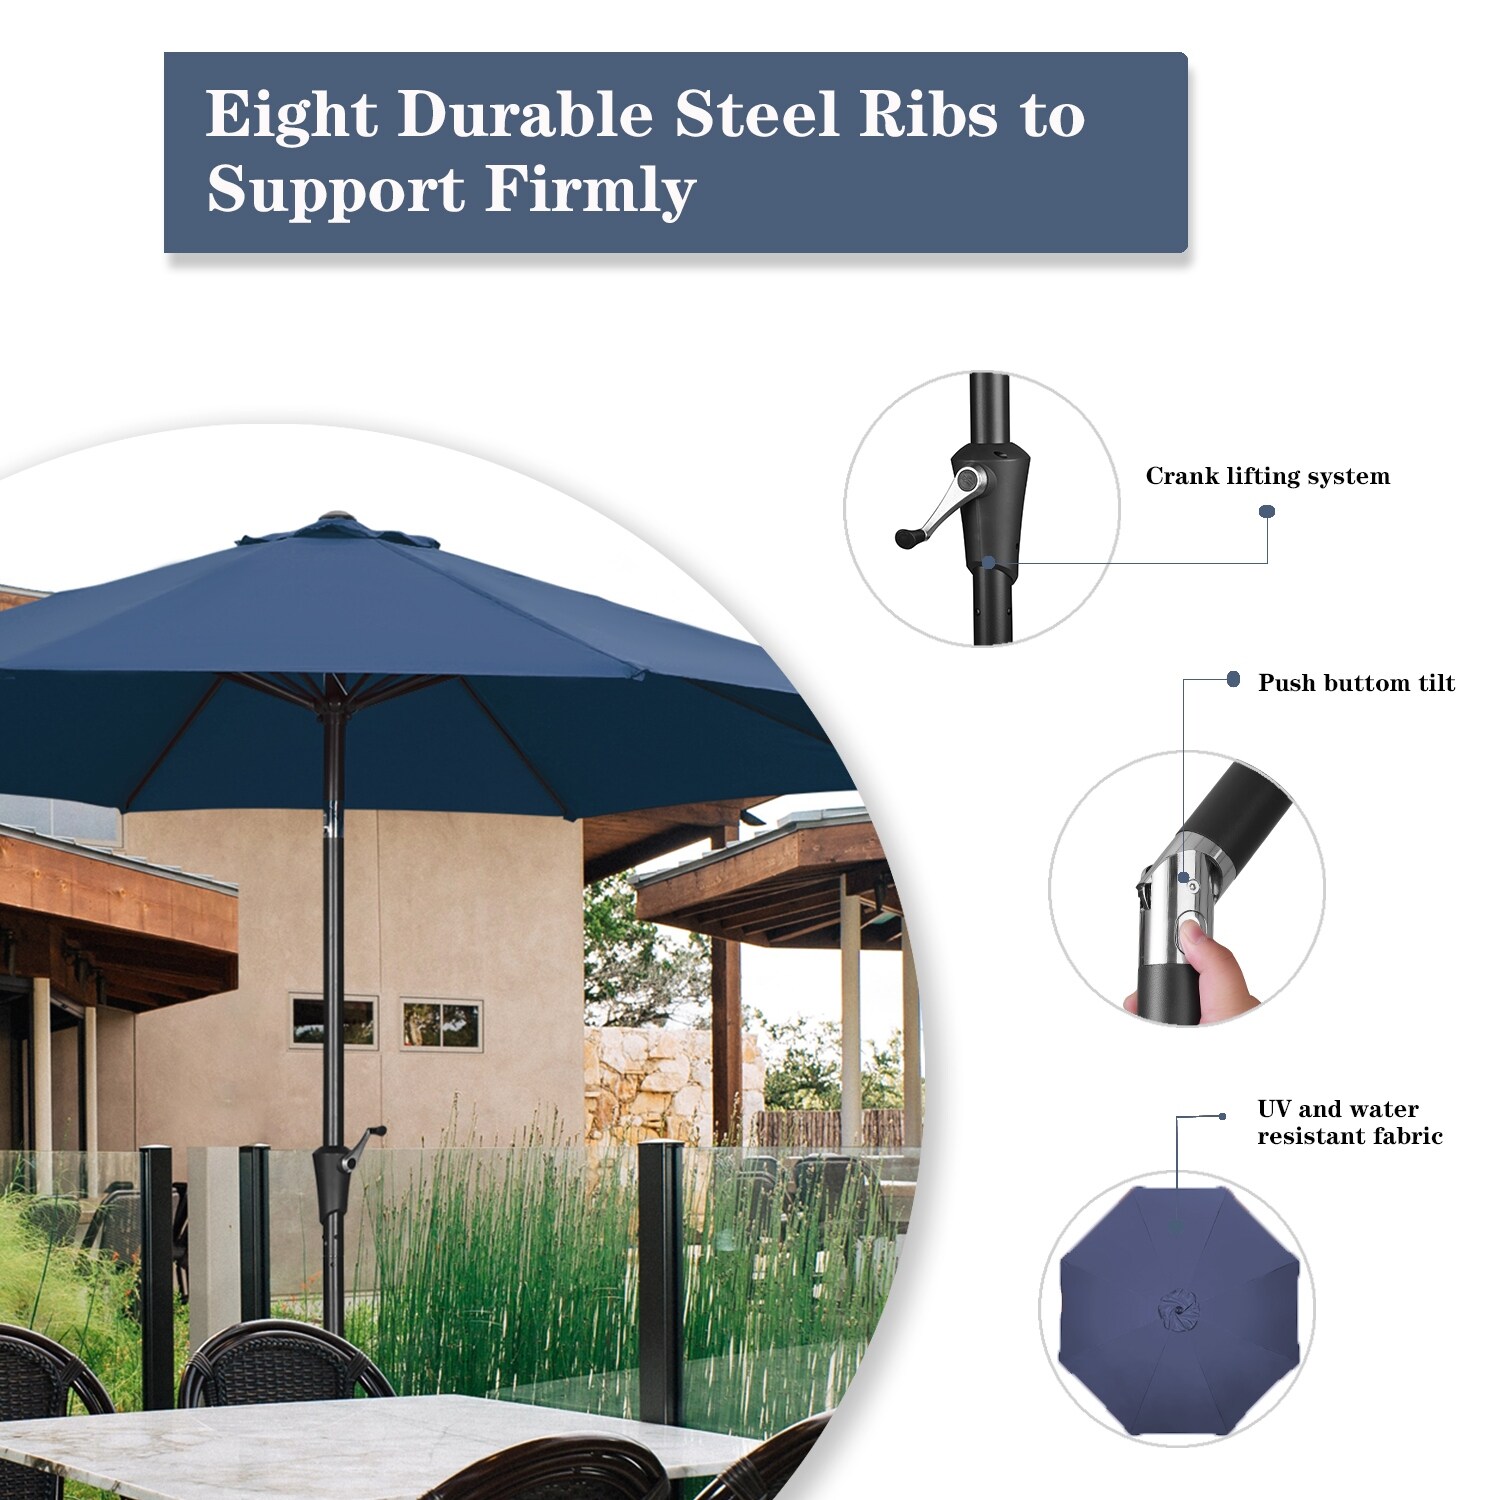 Ainfox 11-foot Patio Umbrella with a 1.9-inch Pole (Base not 